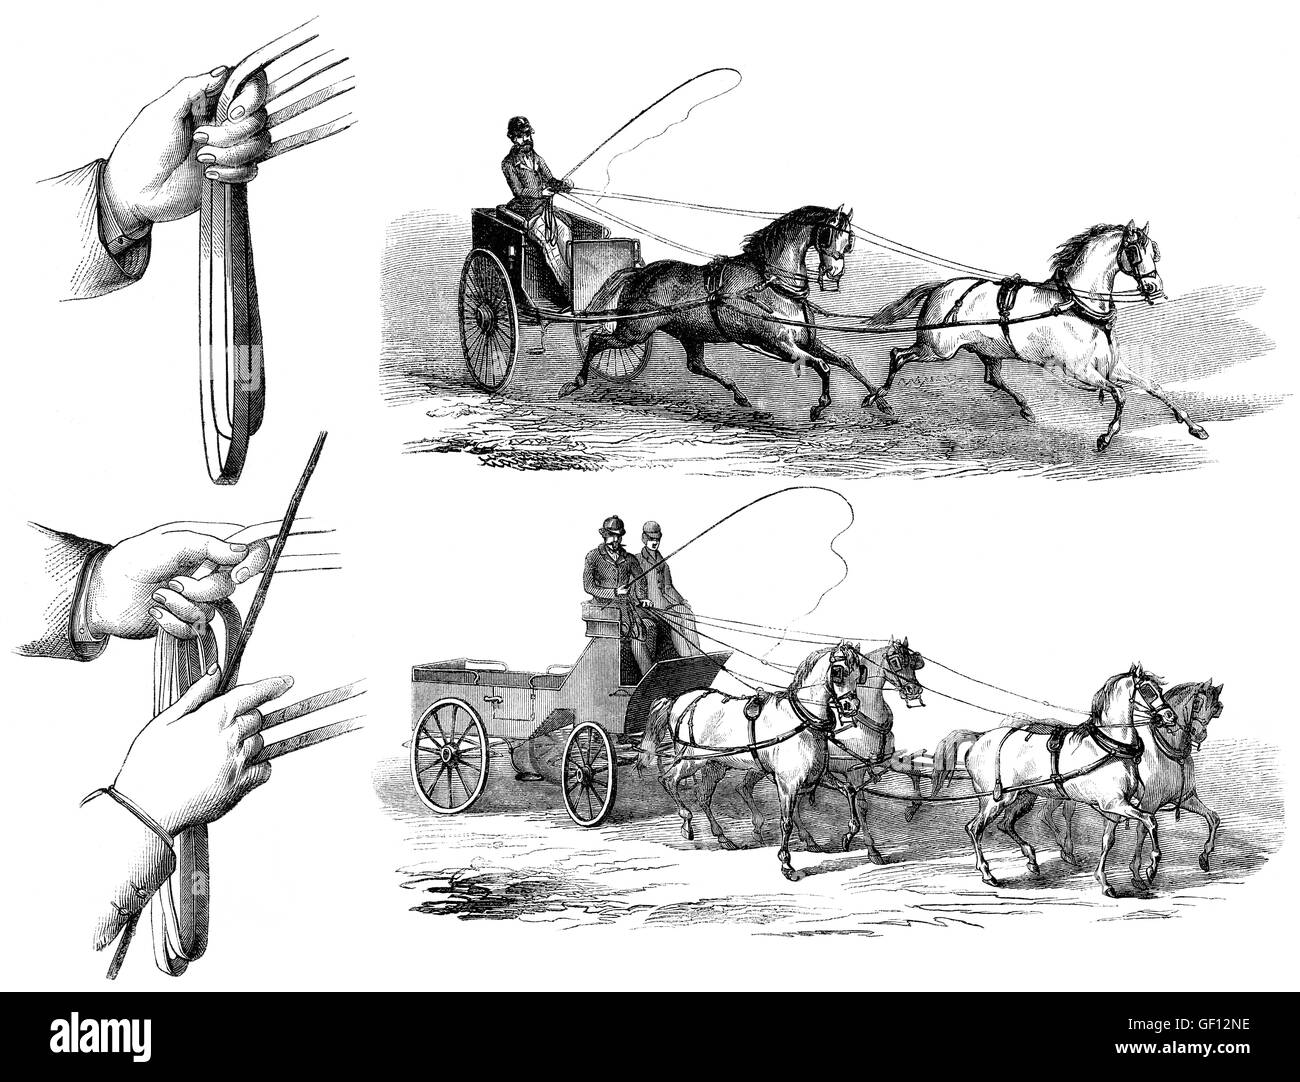 Methods of guiding horses by pulling on its reins, two or four horses driving Stock Photo